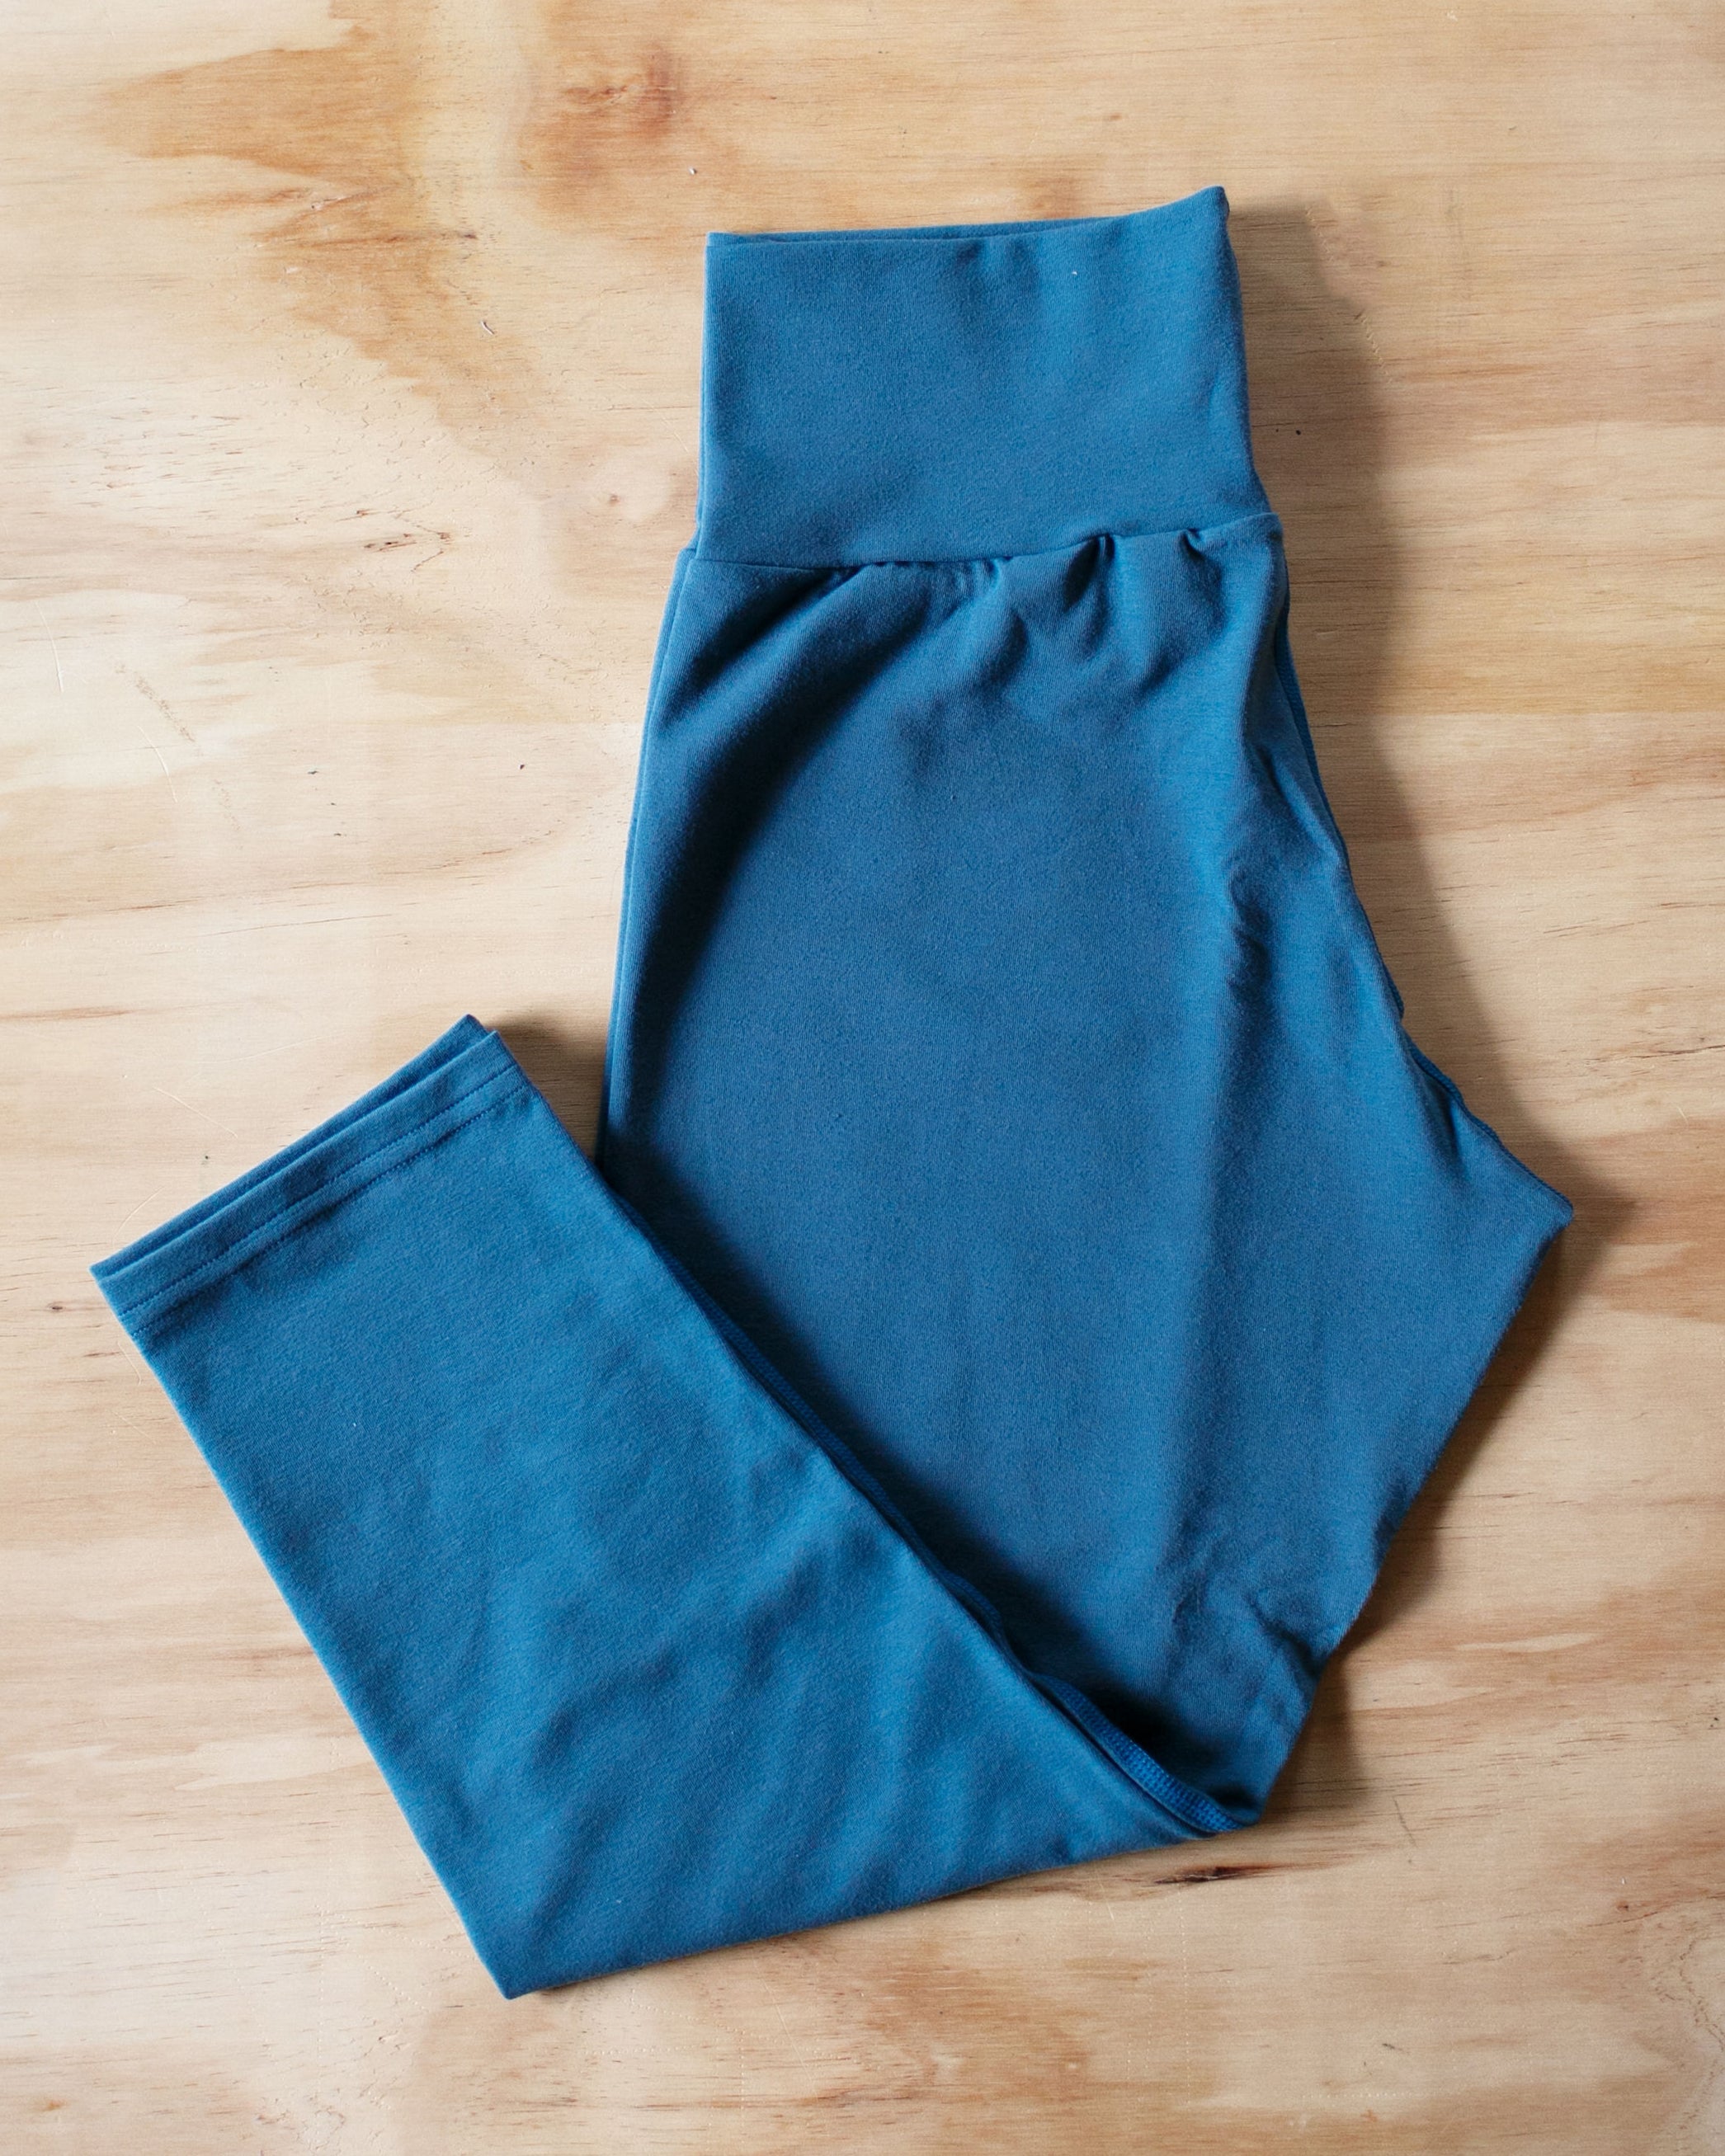 Flat lay of Thunderpants Organic Cotton 3/4 Length Leggings in Stormy Blue color.